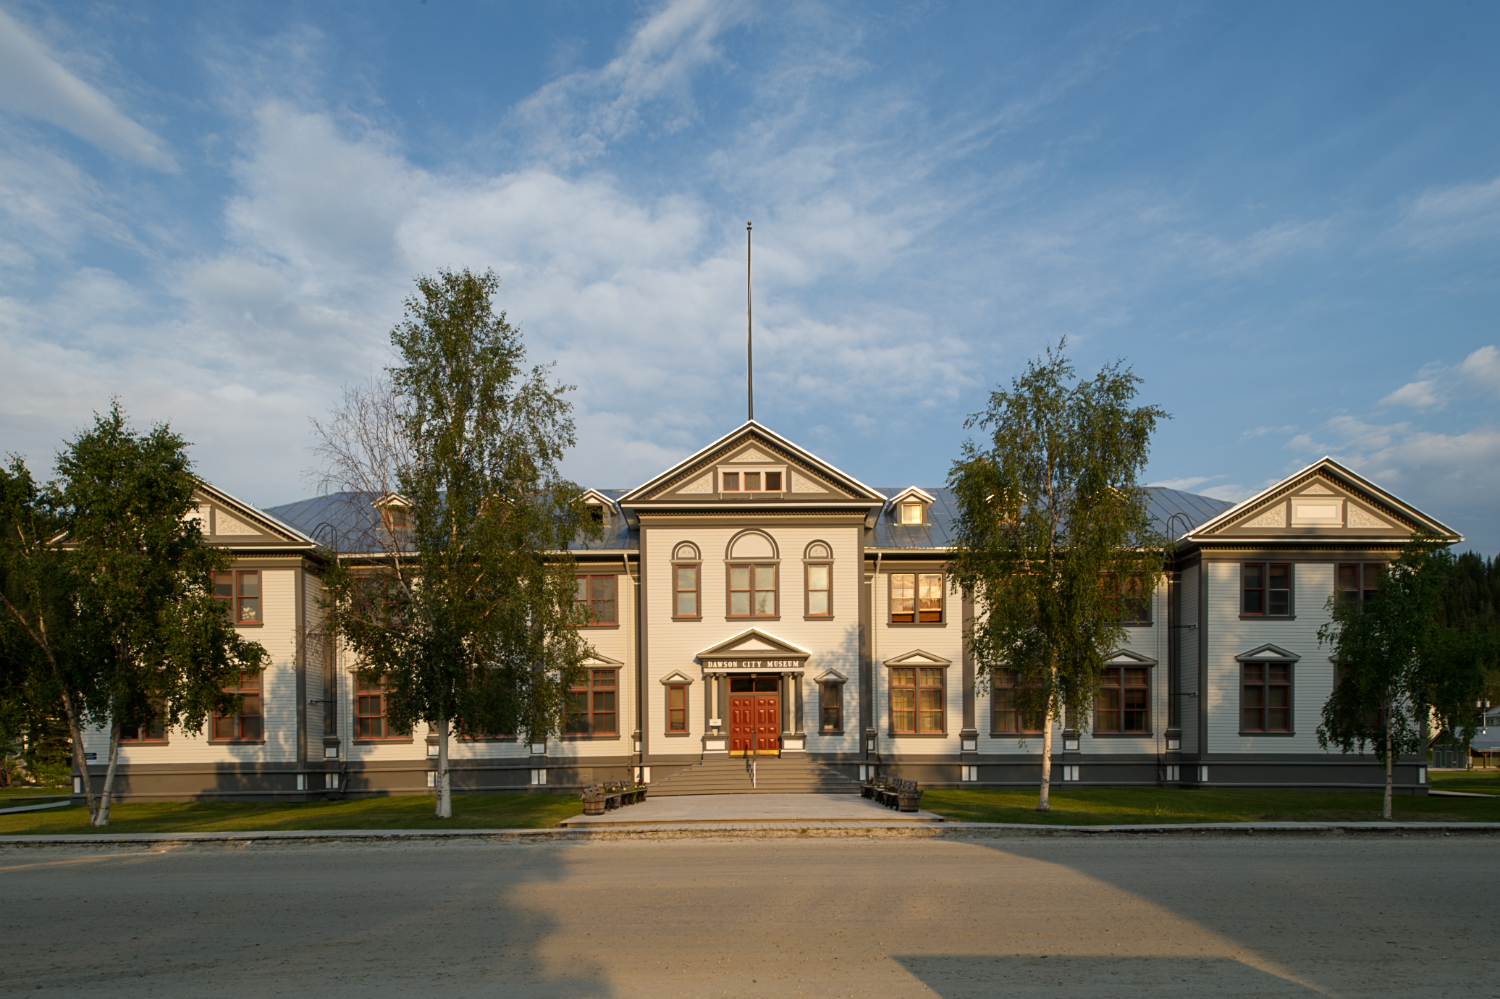 A stately, large symmetrical wooden building in the Classical style.